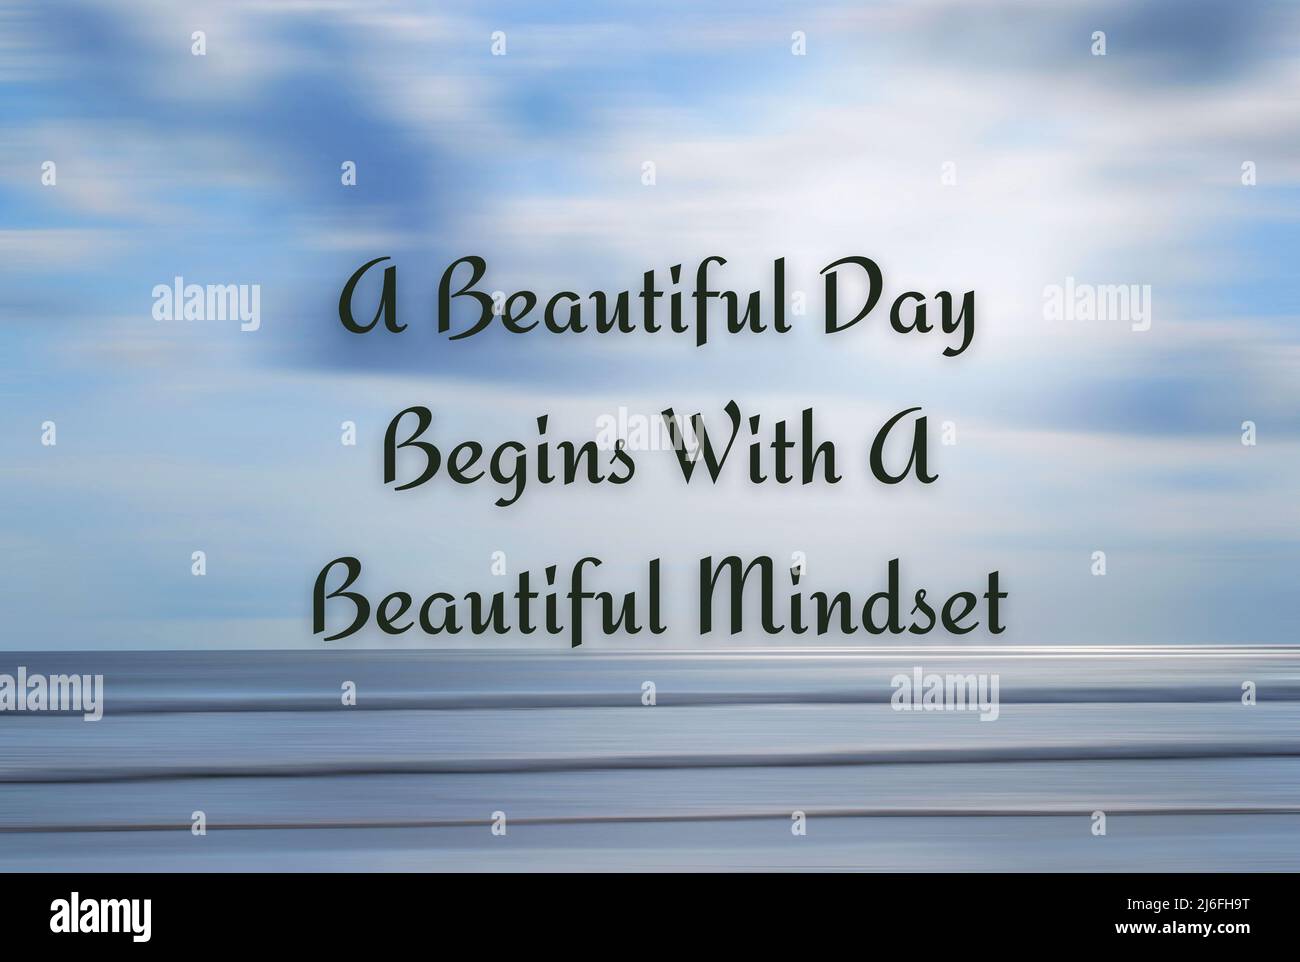 Inspirational quote - A beautiful day begins with a beautiful mindset ...